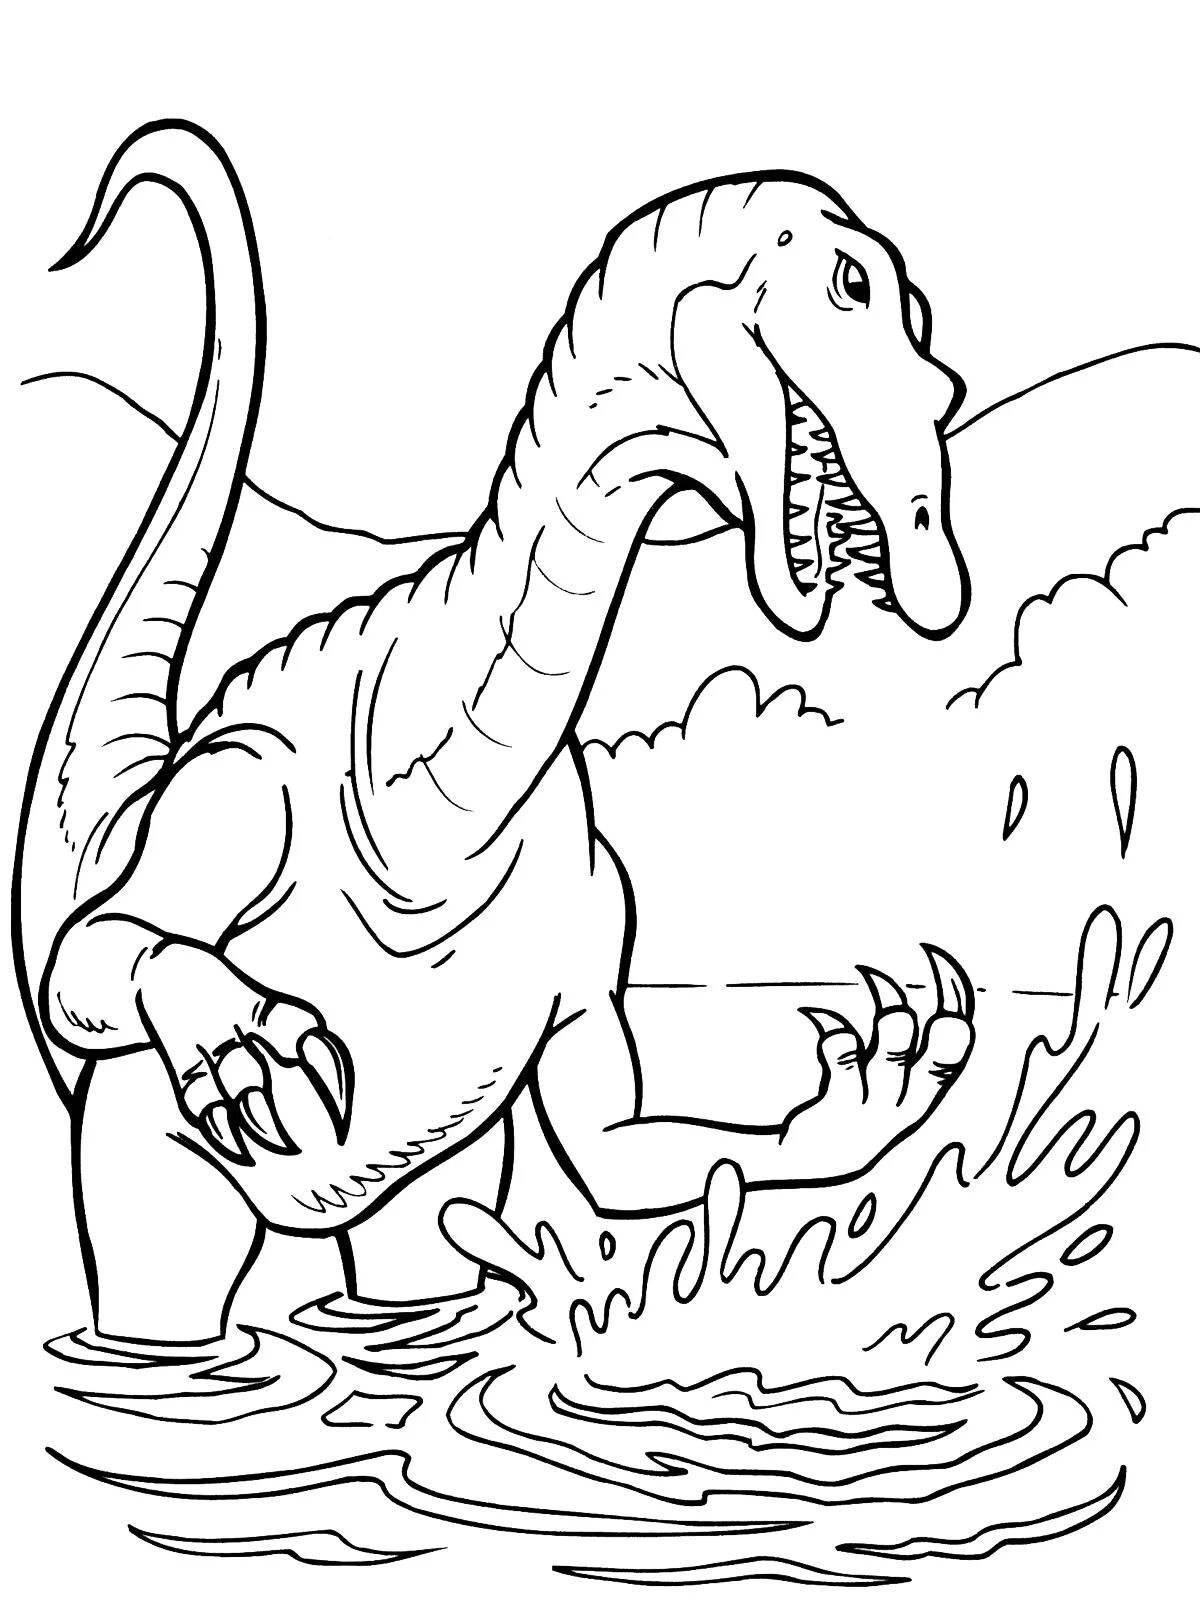 Outstanding dinosaurs coloring pages for boys 5-7 years old